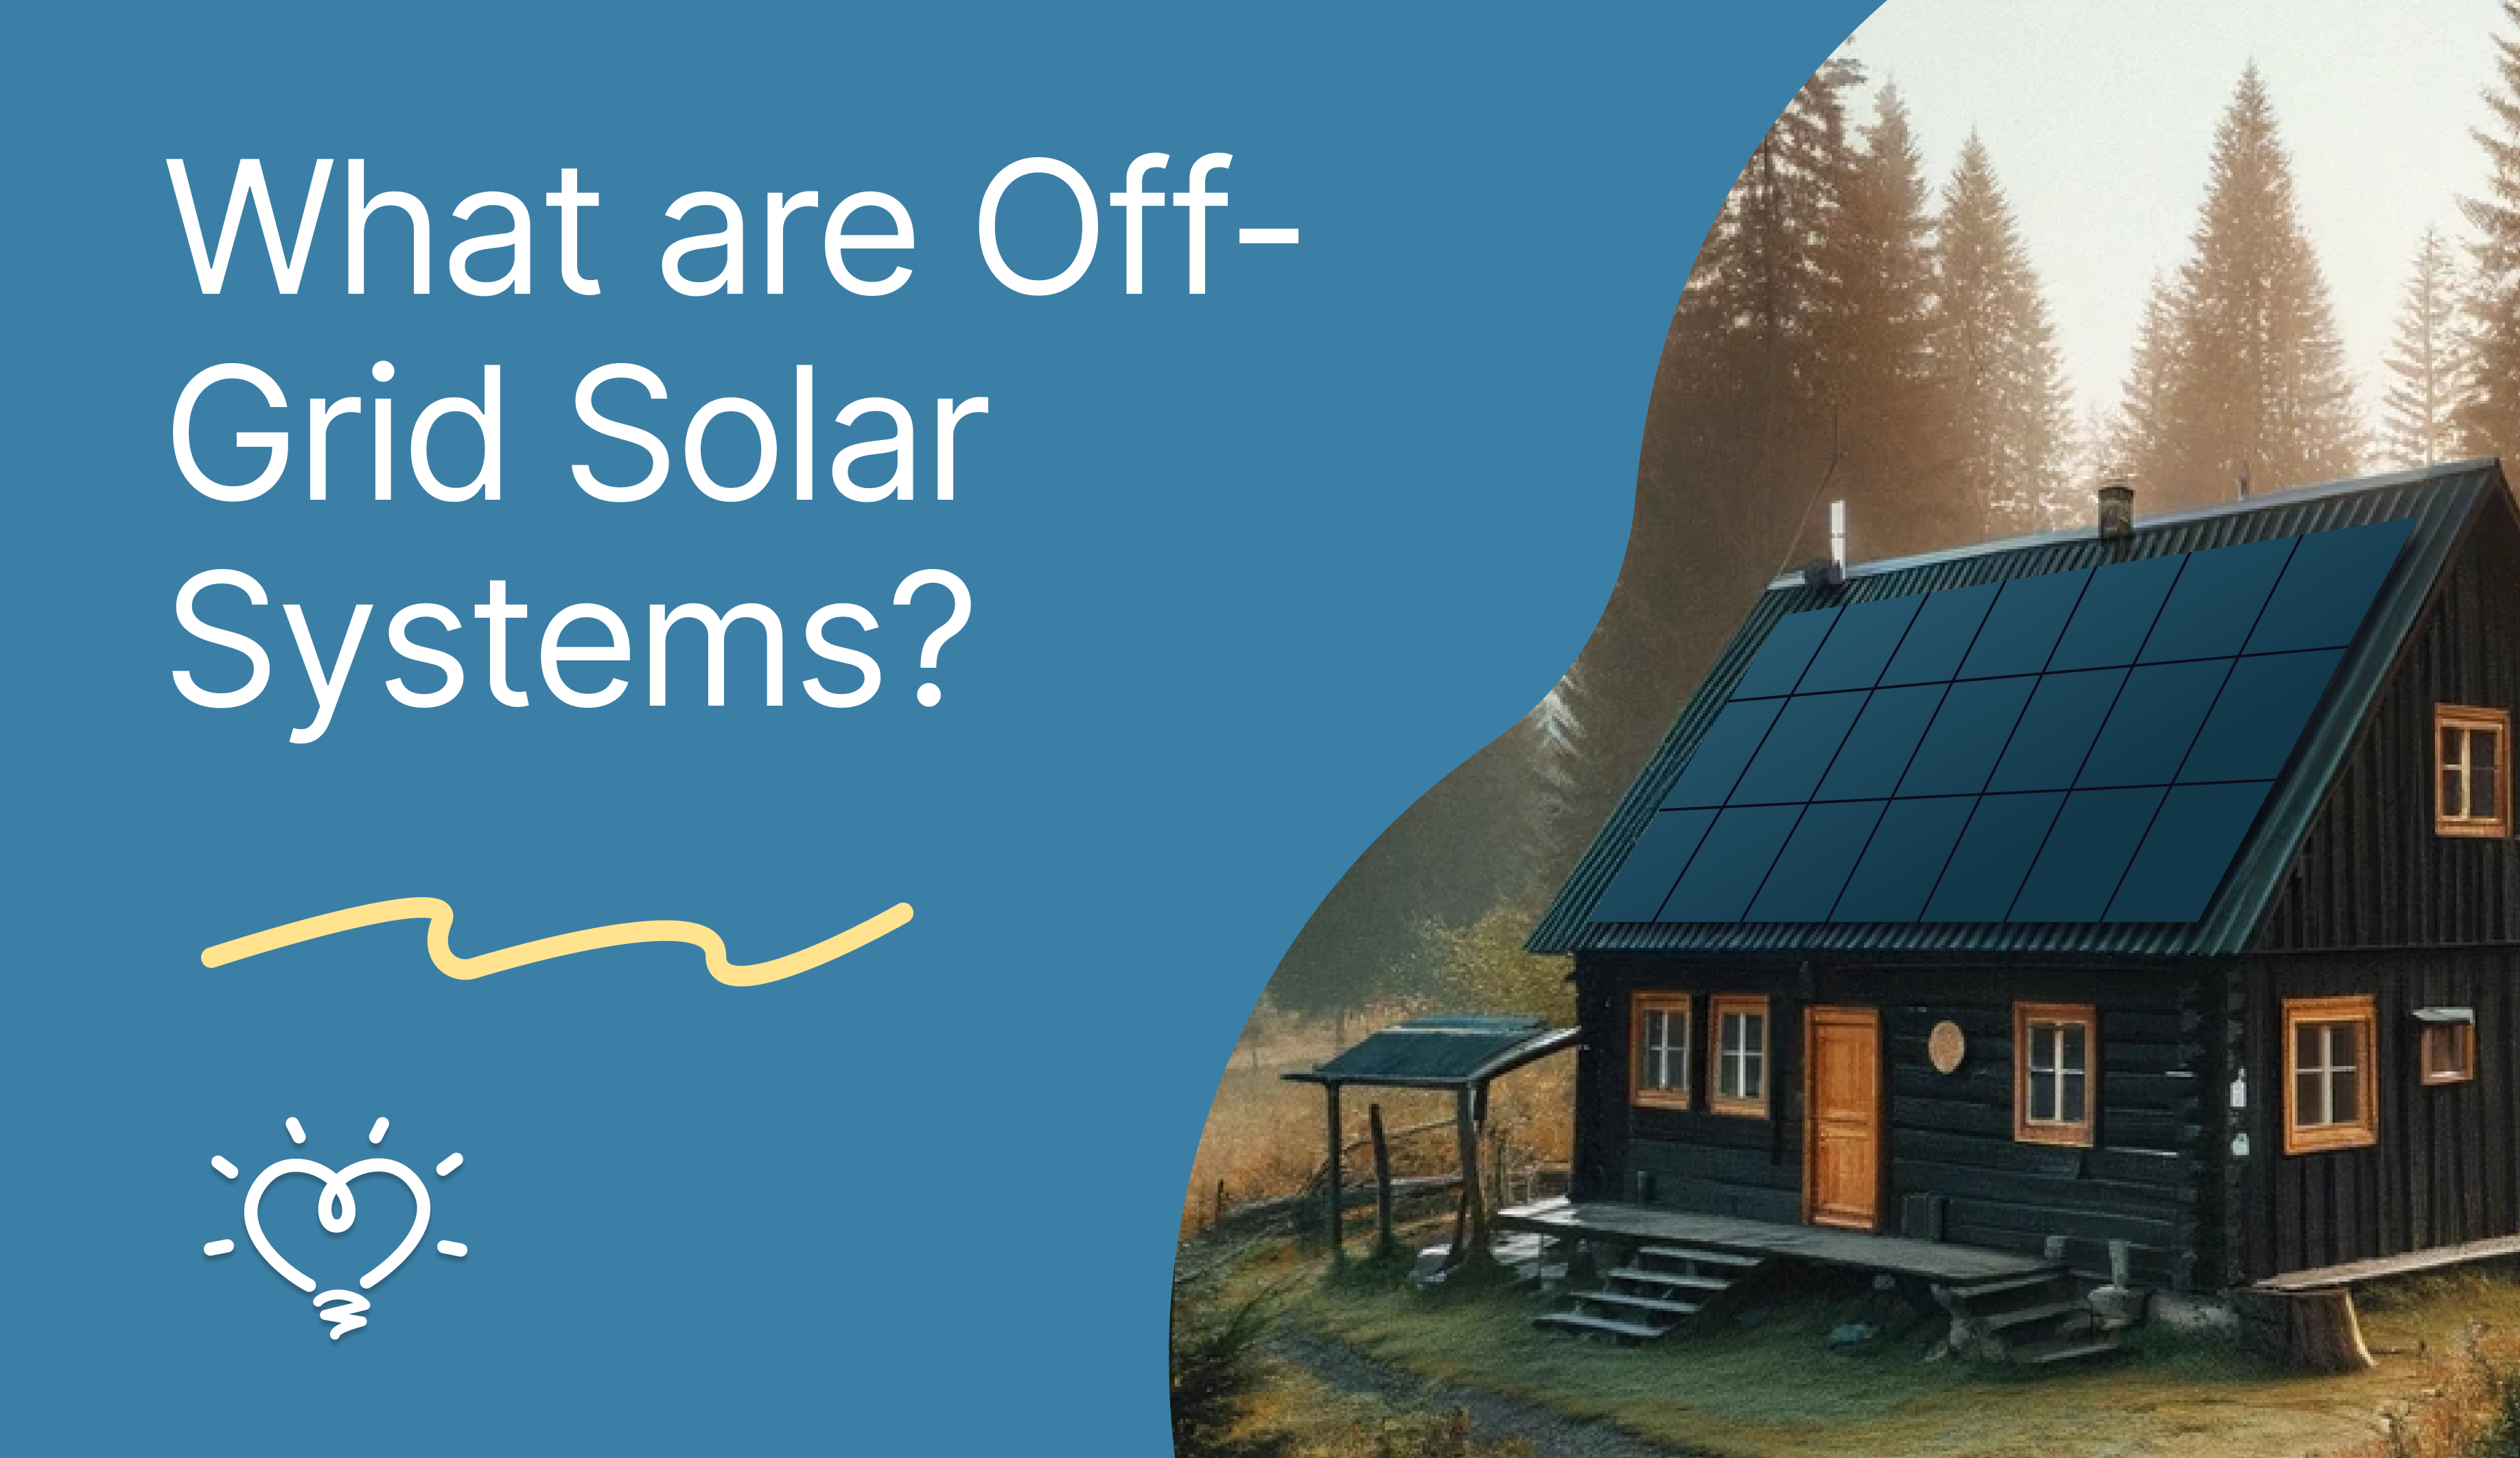 What are Off-Grid Solar Systems?